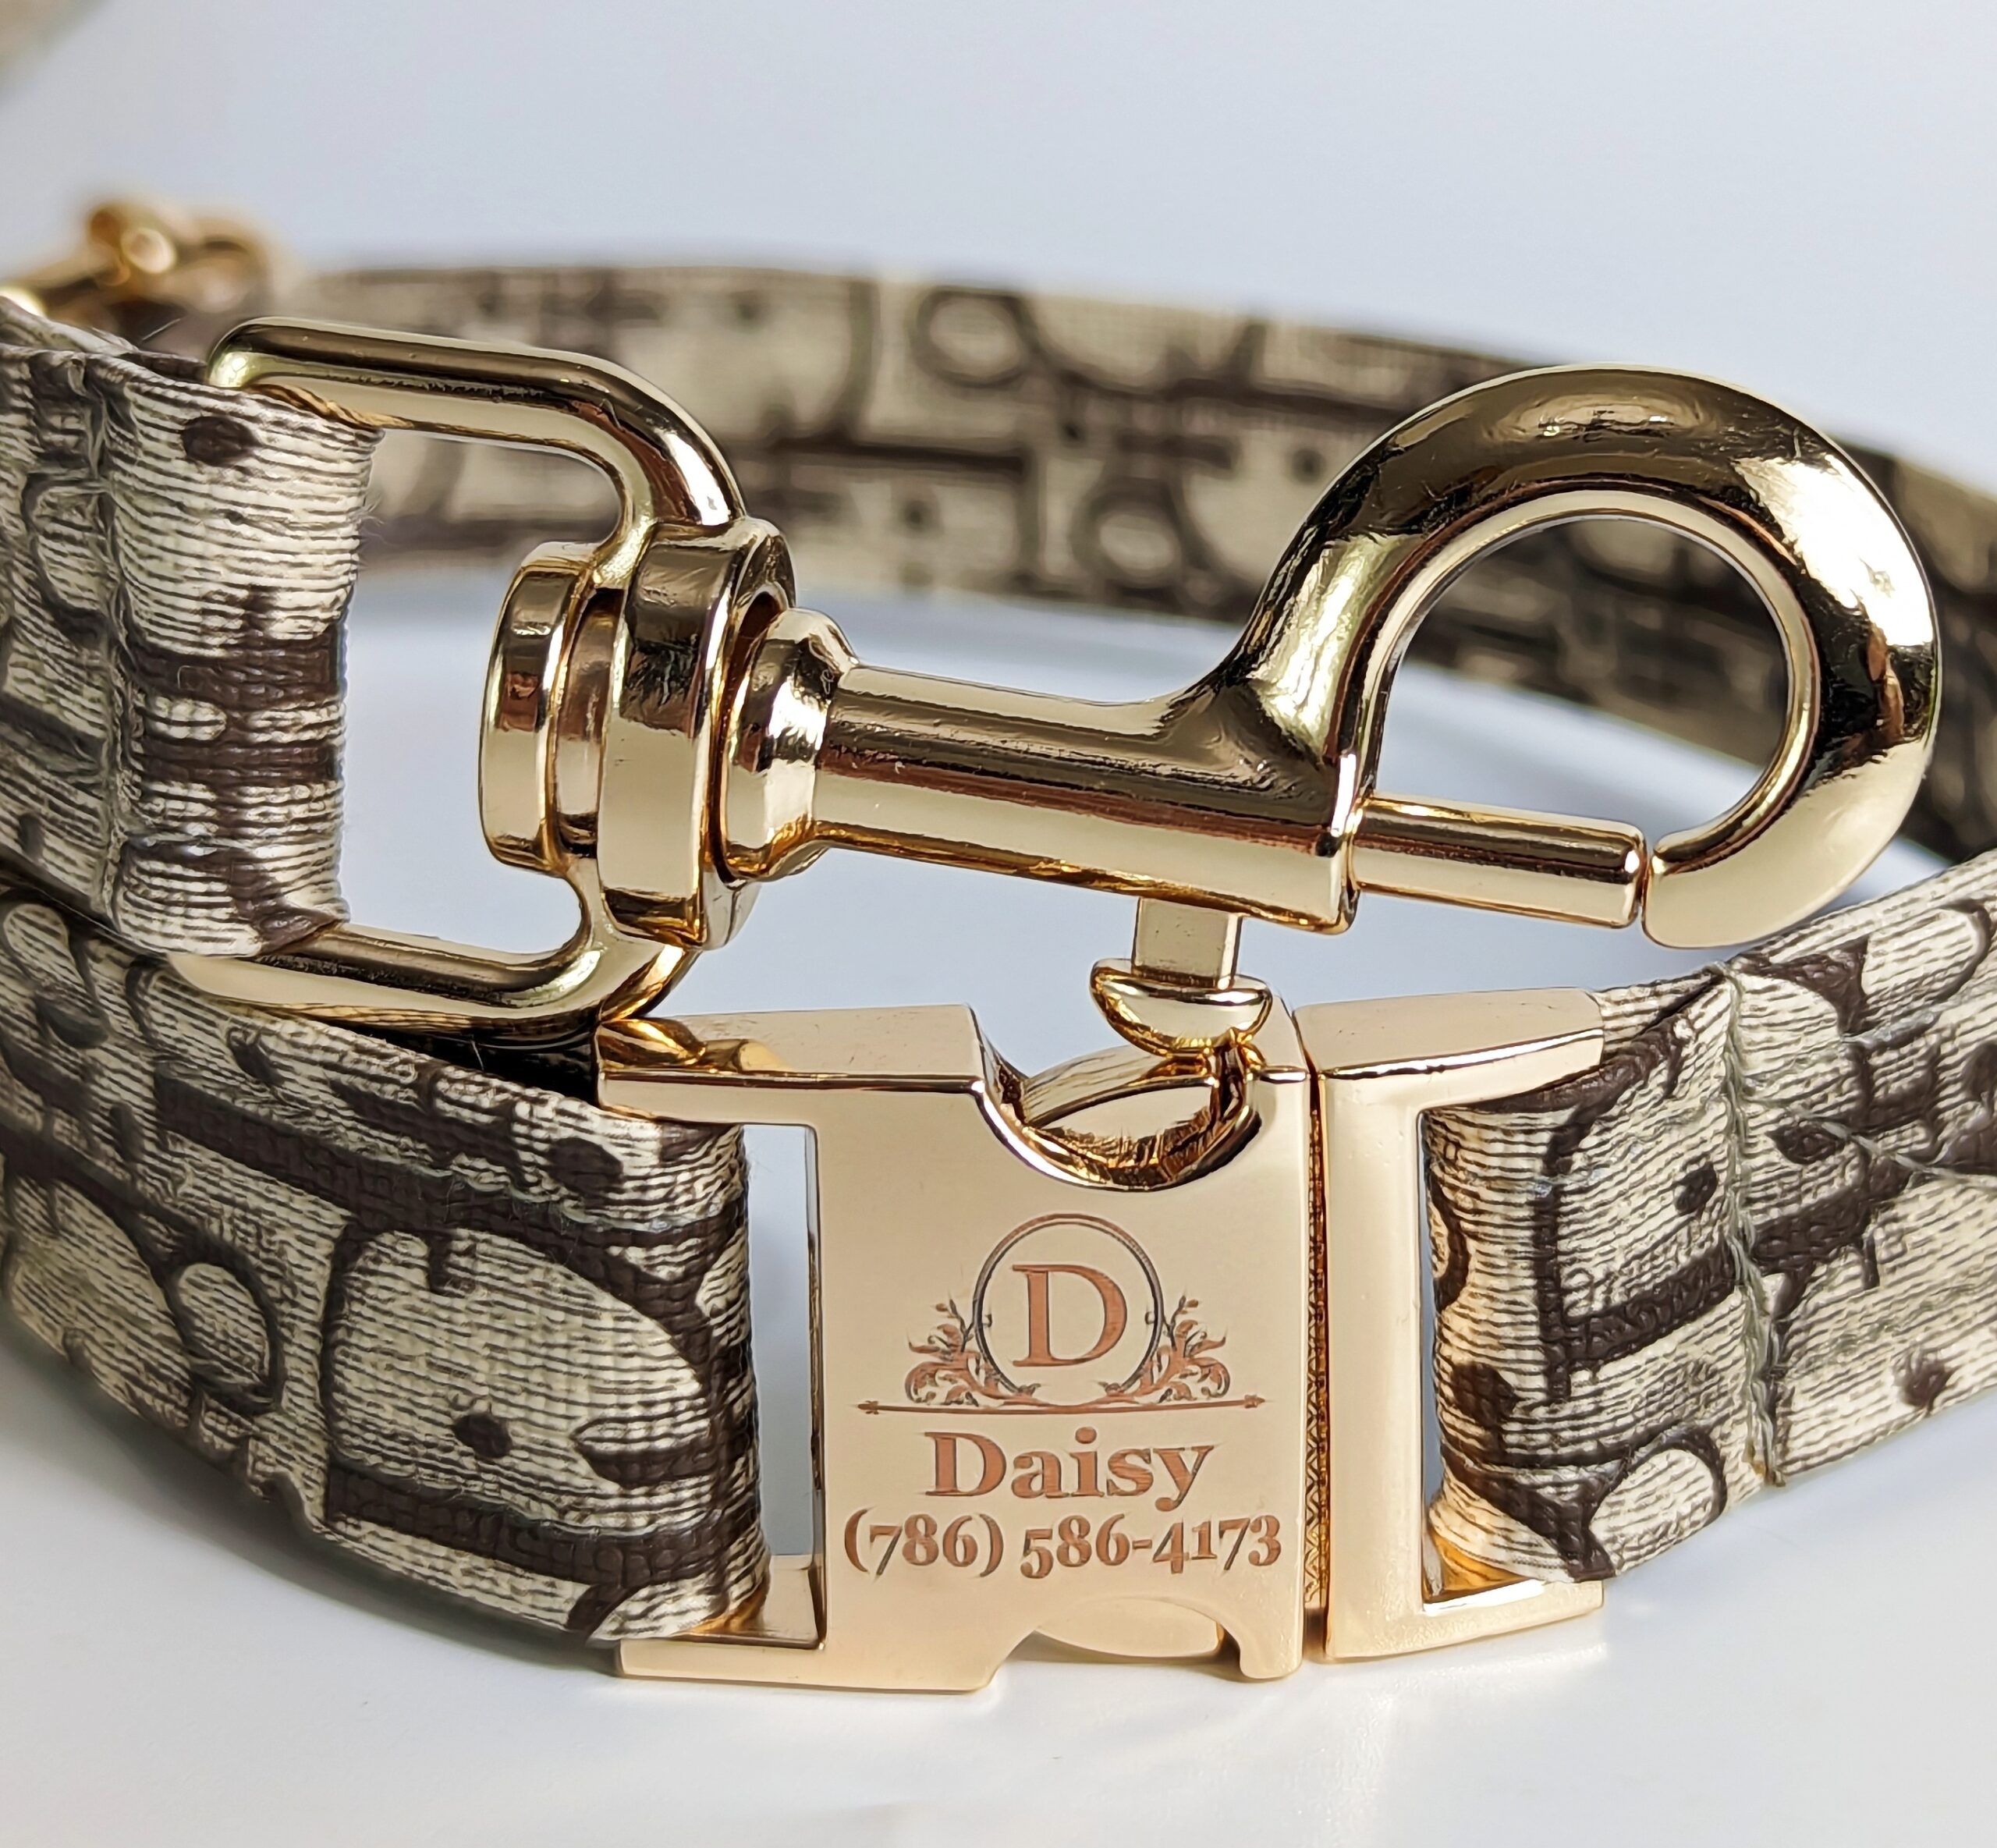 dior designer dog collar and leash in leather